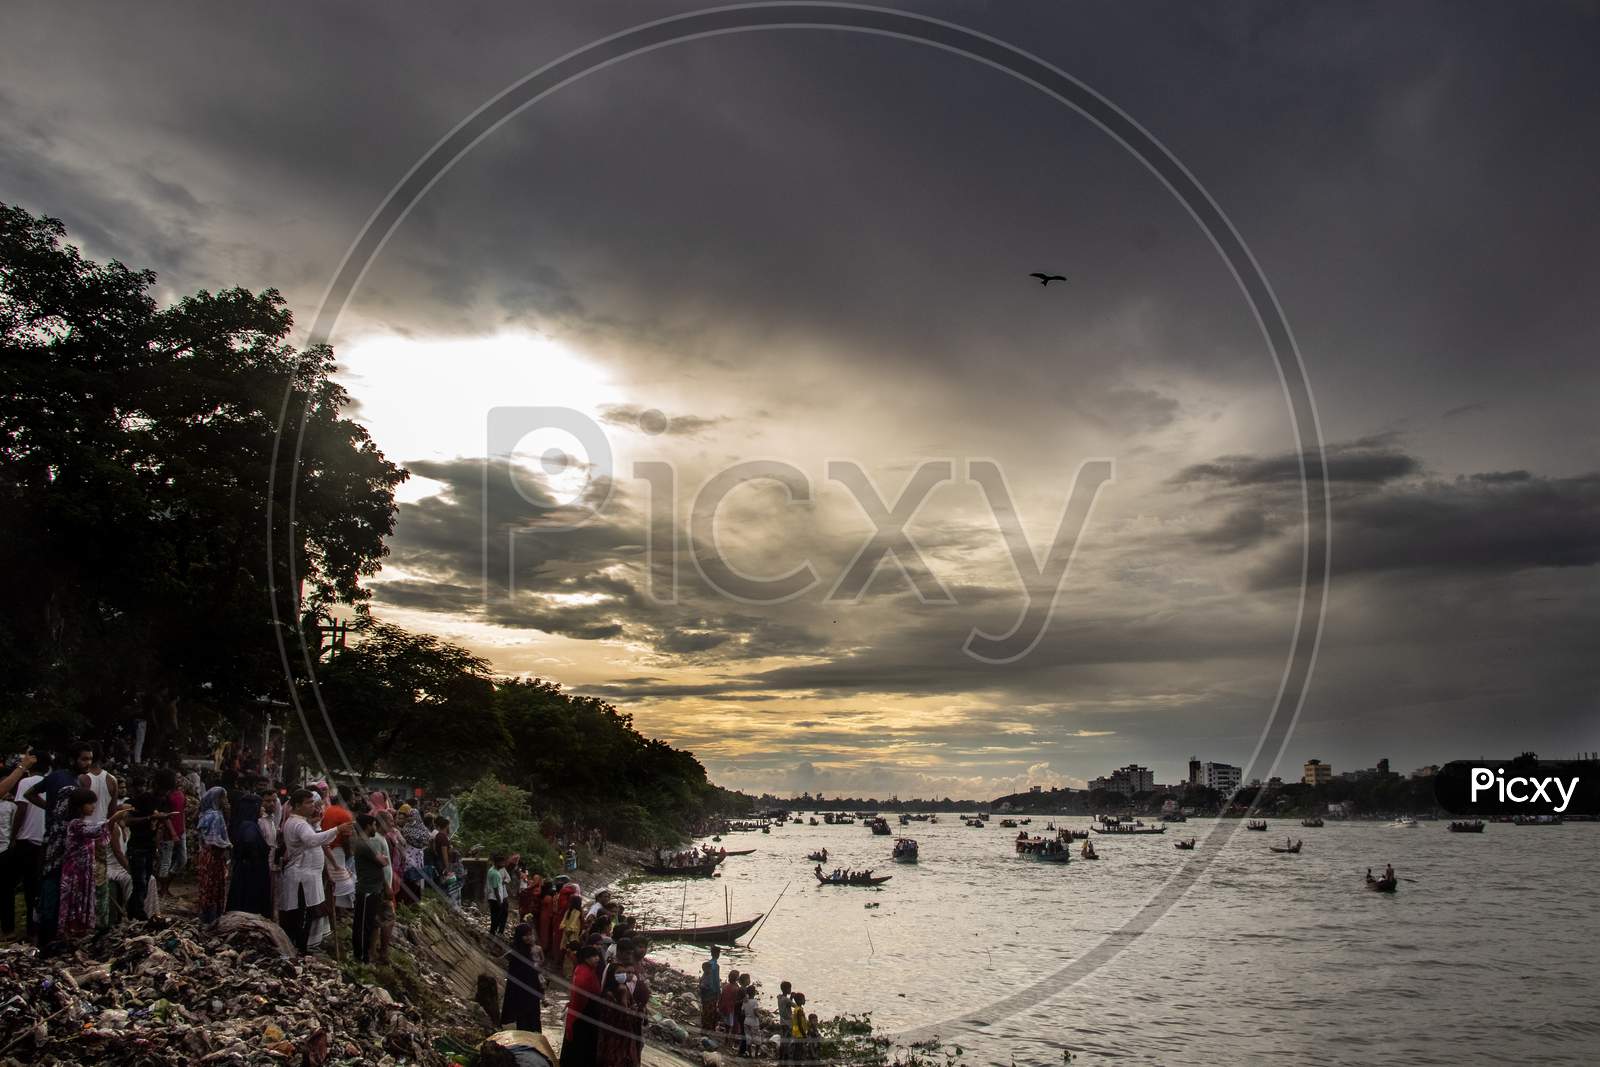 Spectator Of Boat Race Enjoying Under The Cloudy Sky. This Image Has Been Captured On September-28- 2021 From Dhaka, Burigongga River, Bangladesh, South Asia